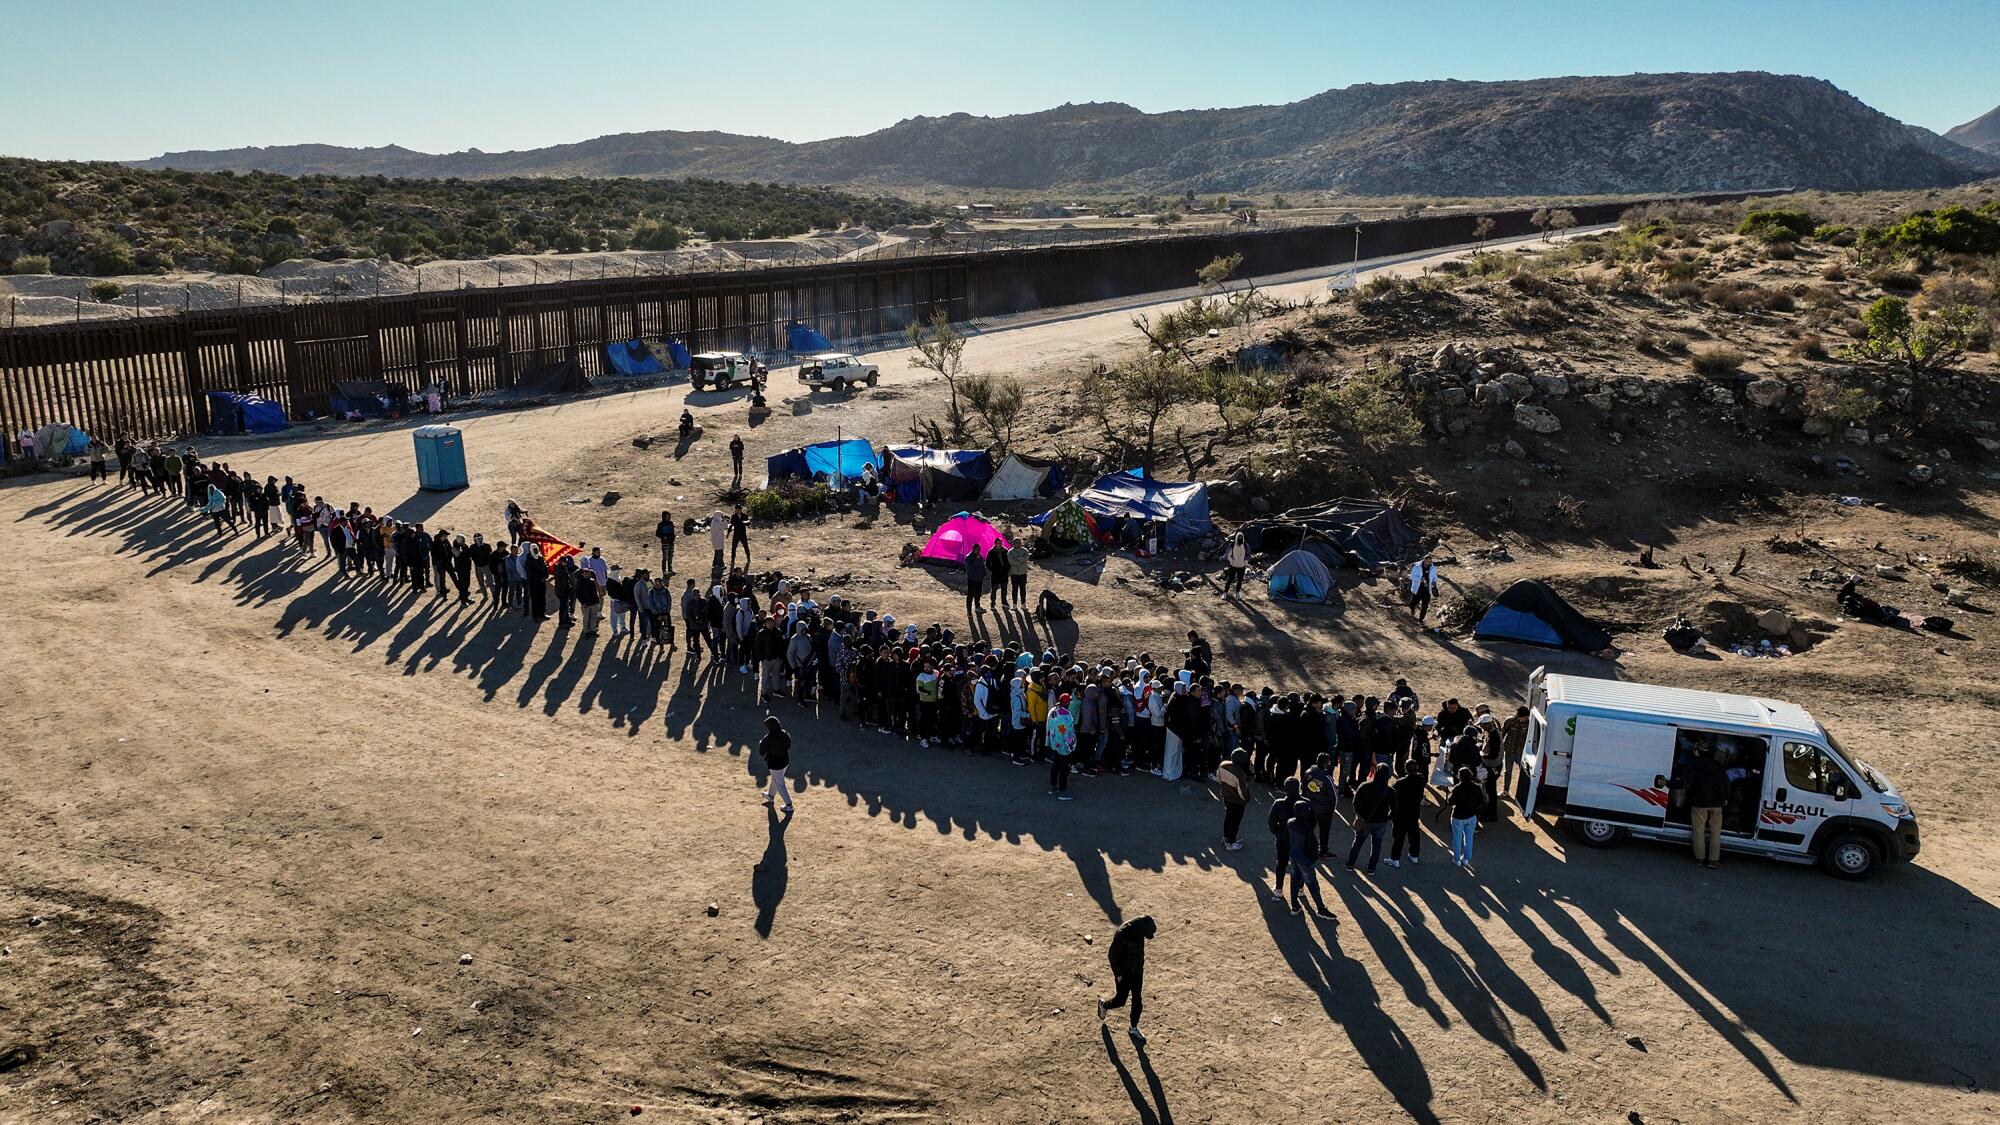 Asylum seekers form a long line behind a vehicle parked in a desert area with a border wall